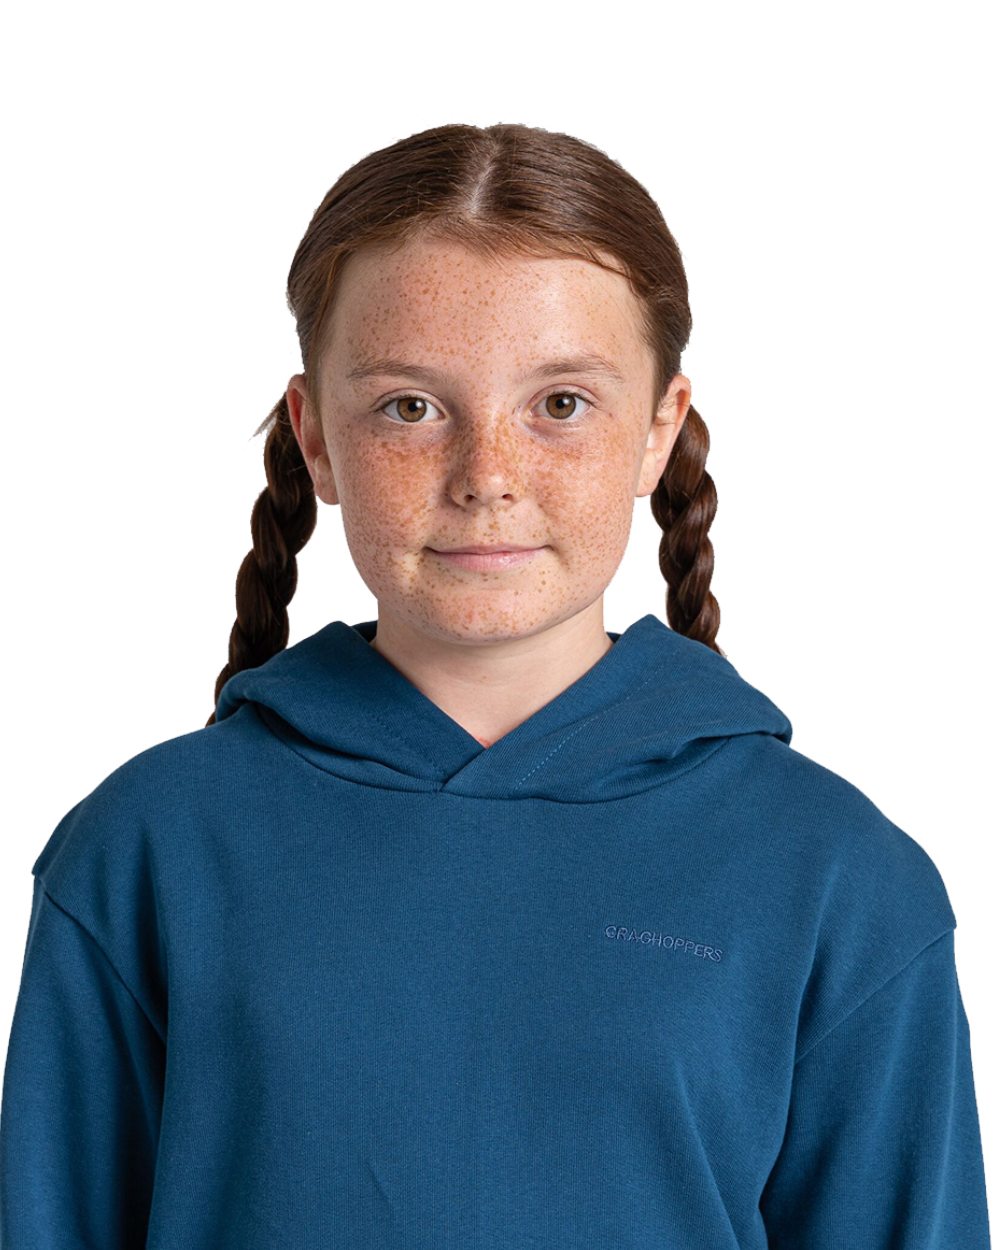 Poseidon Blue Coloured Craghoppers Childrens NosiLife Baylor Hooded Top On A White Background 